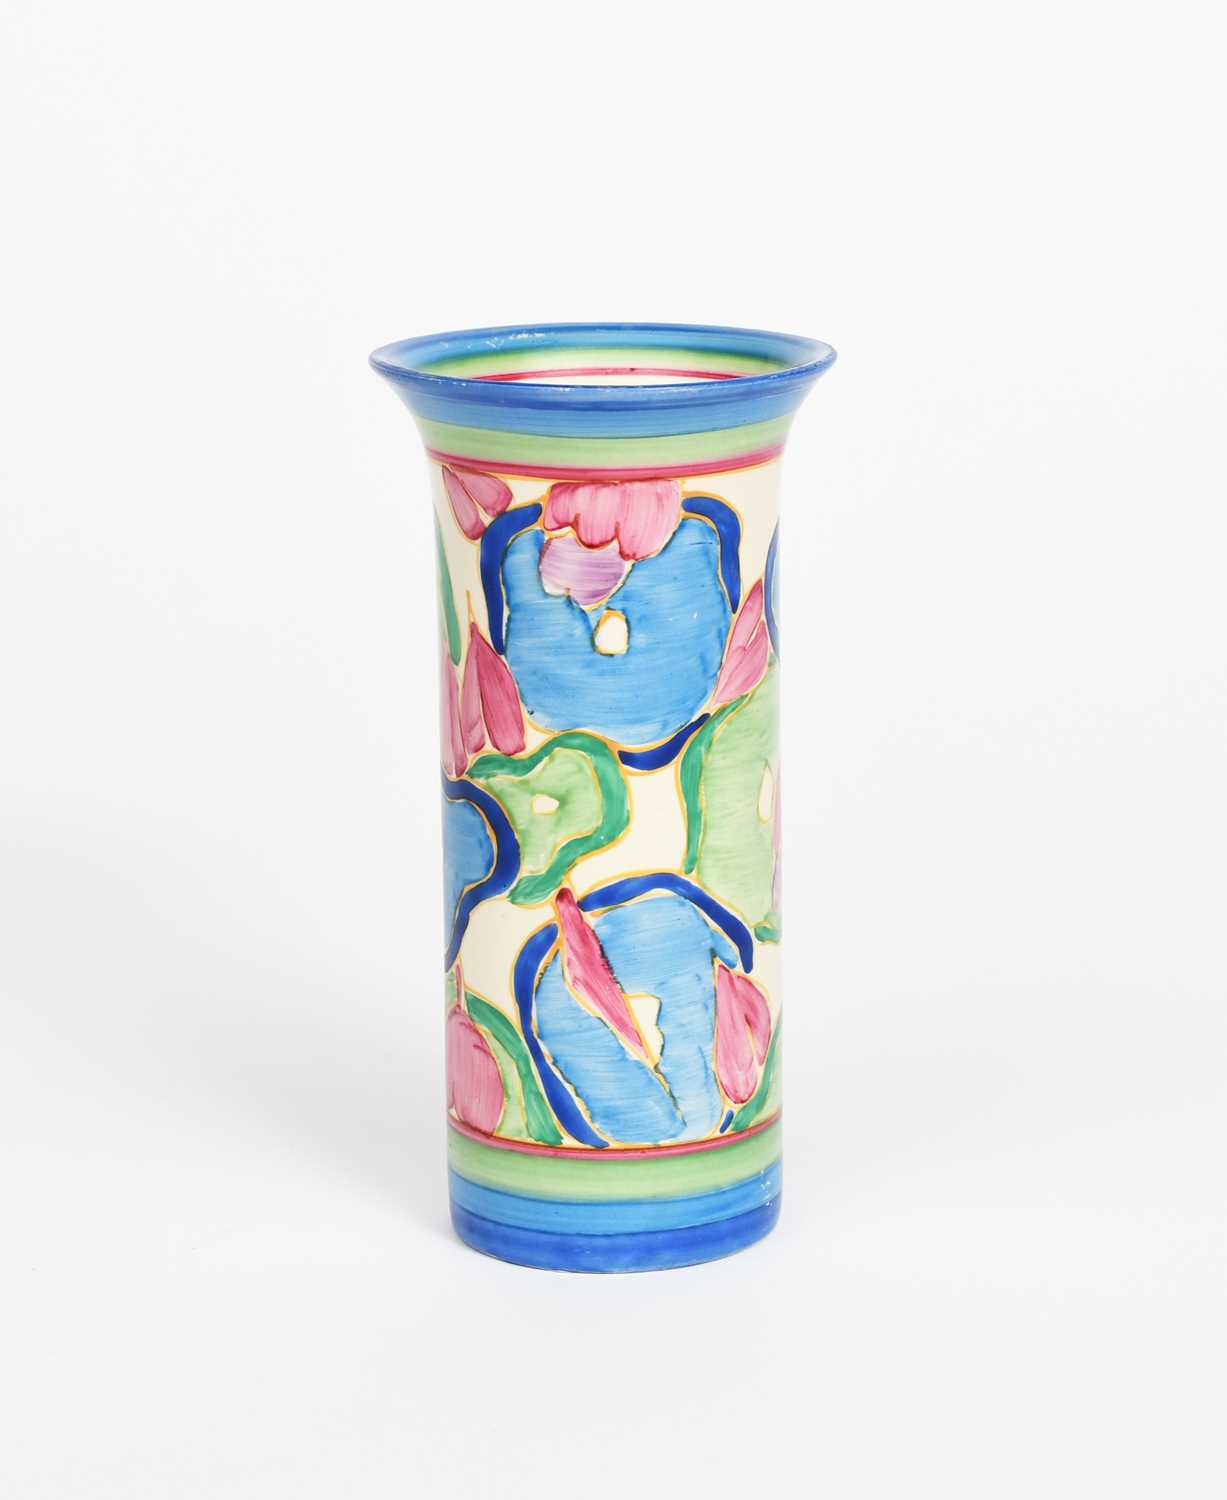 'Blue Chintz' a Clarice Cliff Fantasque Bizarre vase, shape no. 196, painted in colours printed